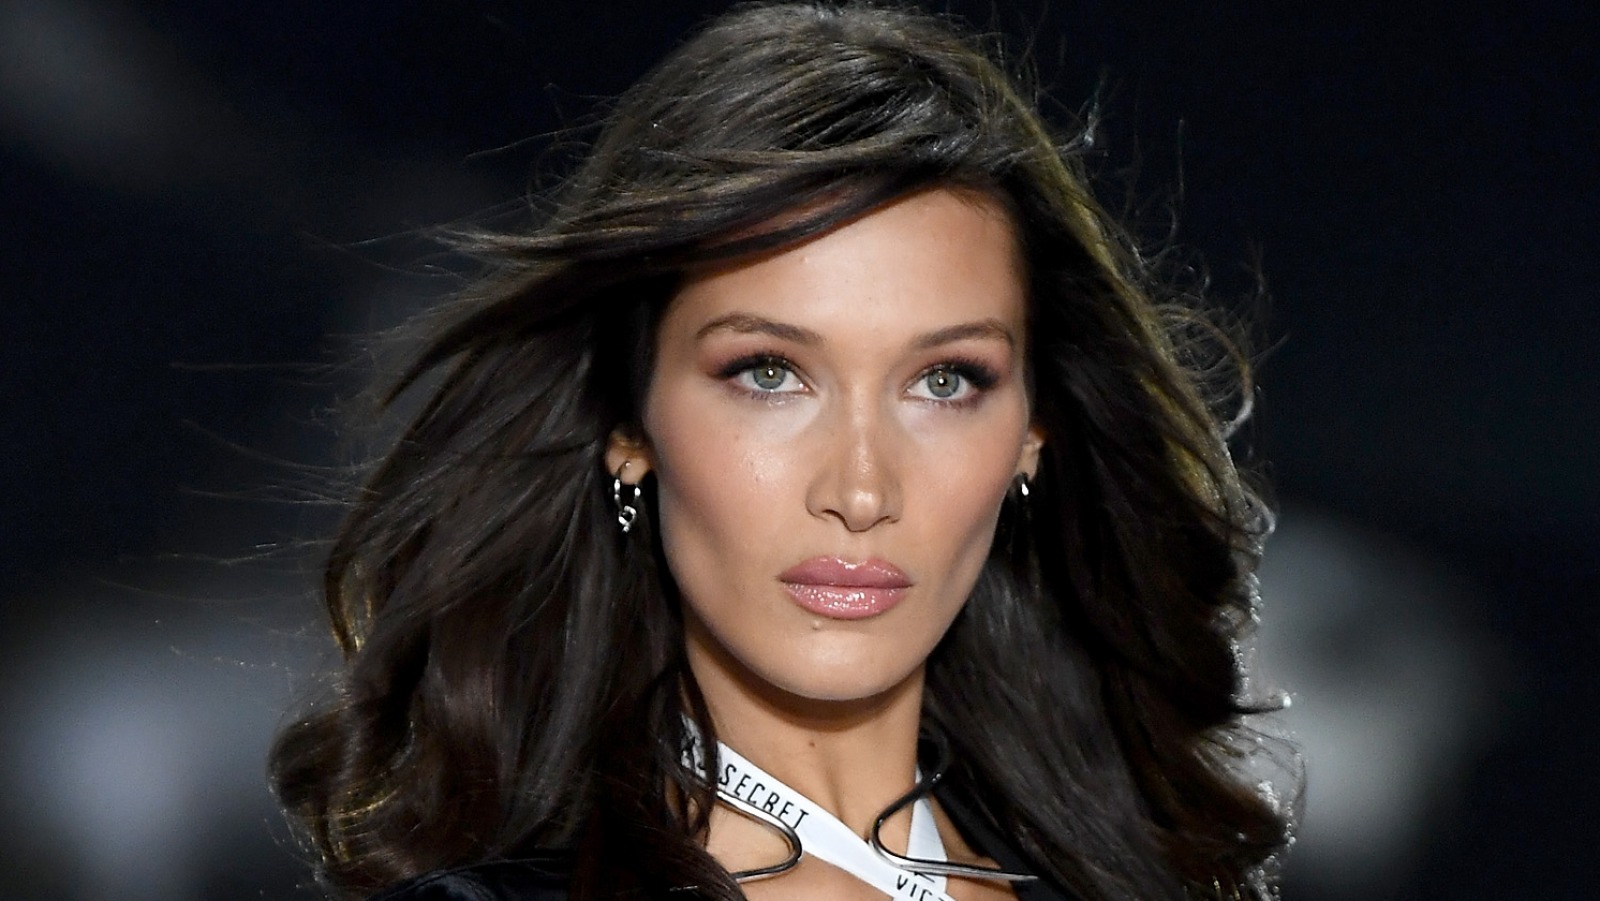 What Bella Hadid Does To Stay Fit May Surprise You